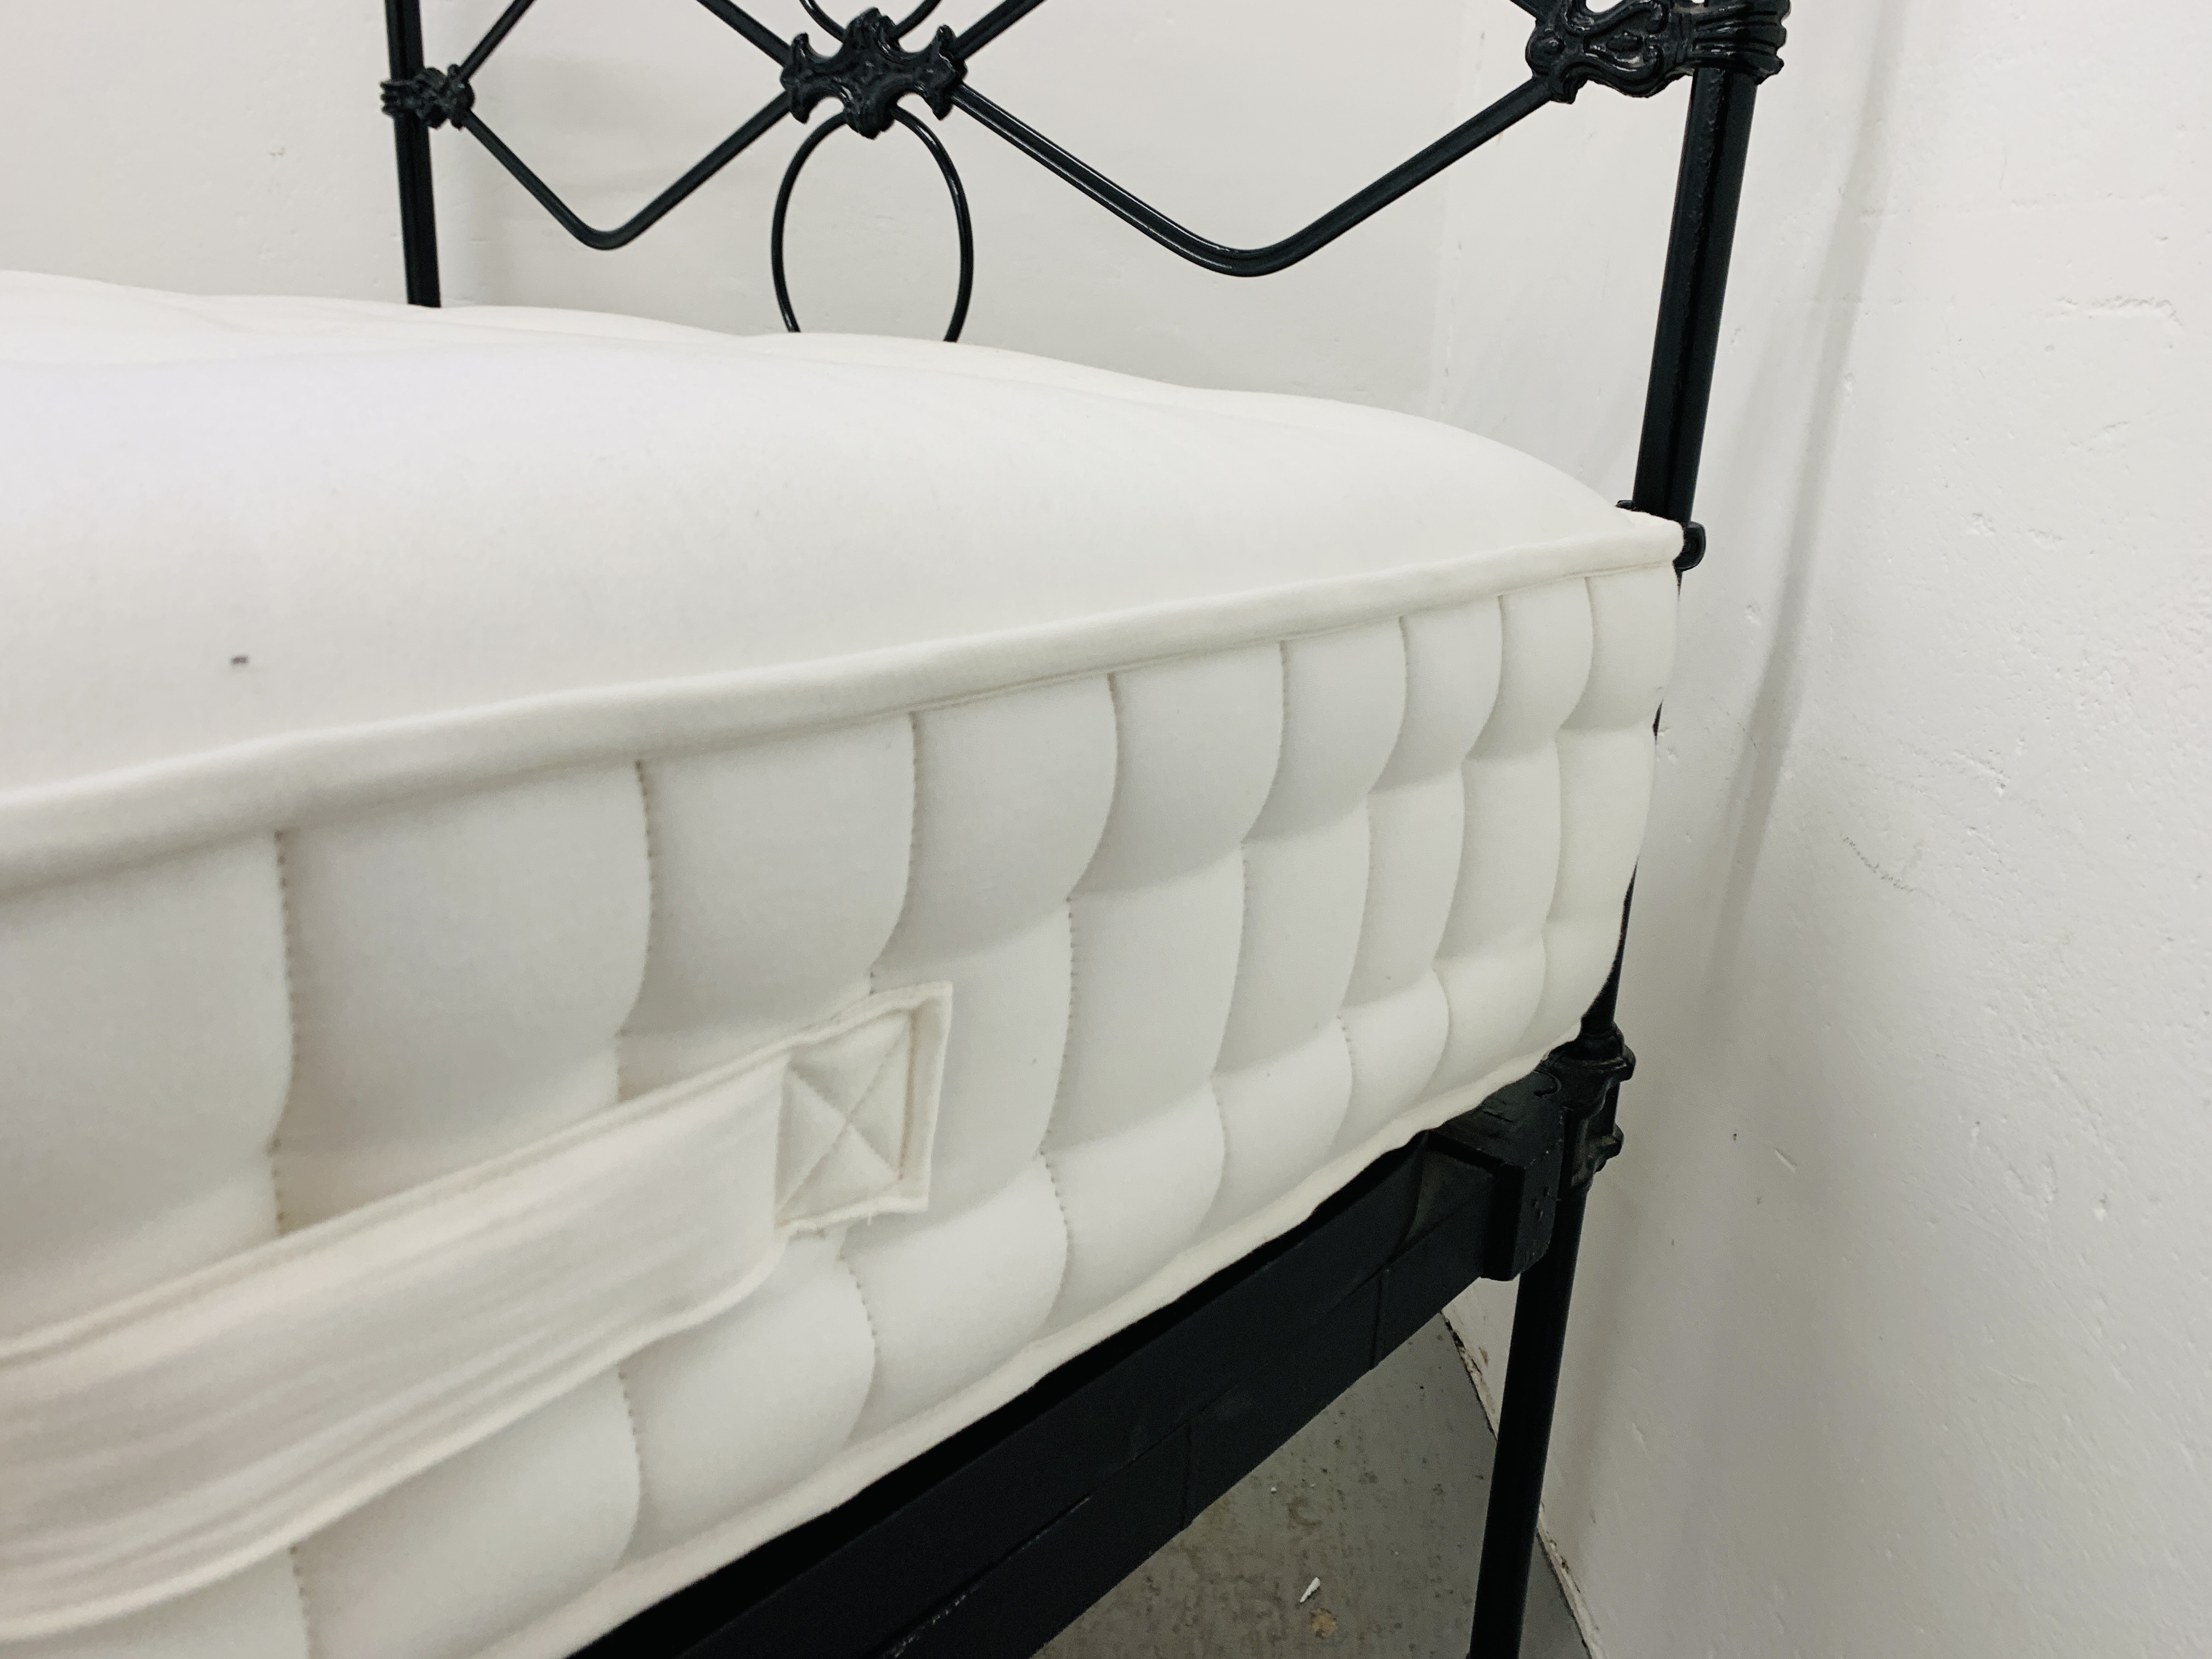 A VICTORIAN STYLE SINGLE IRON FRAMED BEDSTEAD WITH JOHN LEWIS LUXURY MATTRESS. - Image 13 of 16